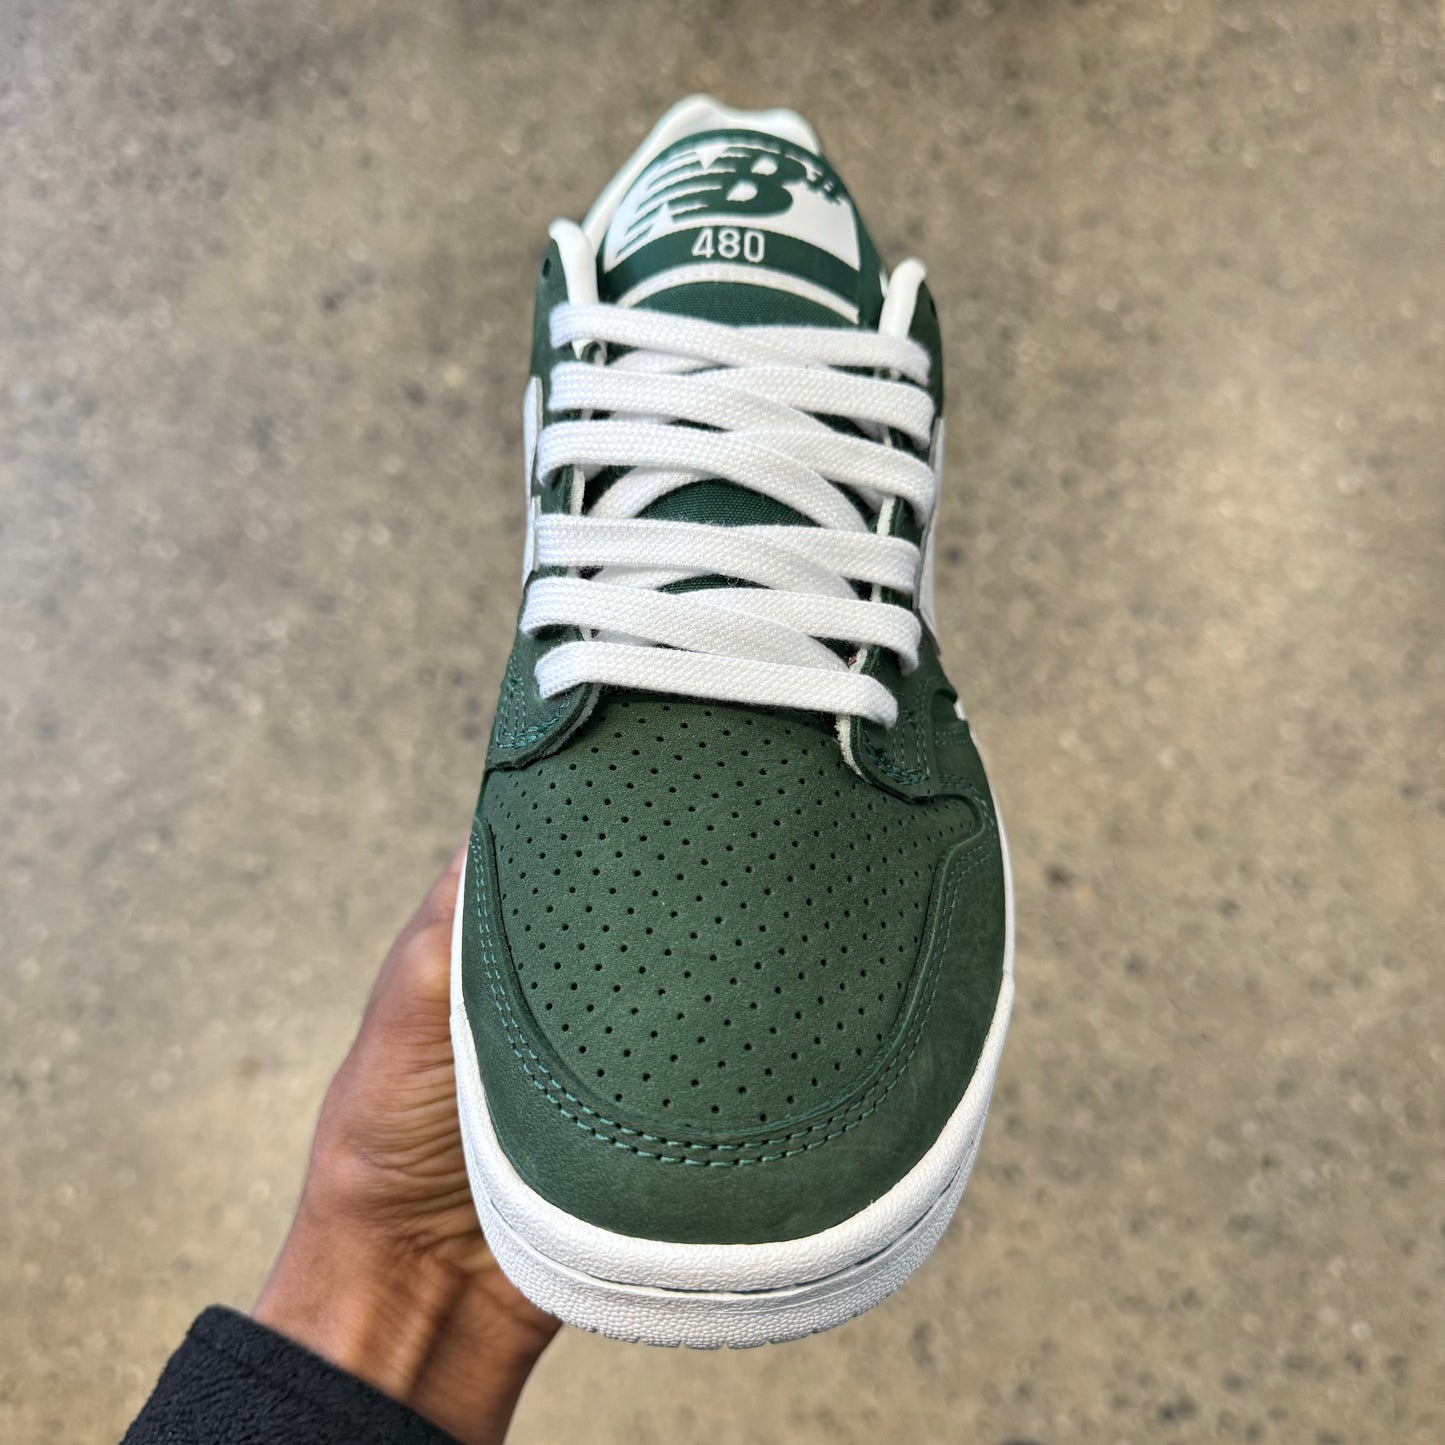 green suede sneaker with white N and white sole, front view